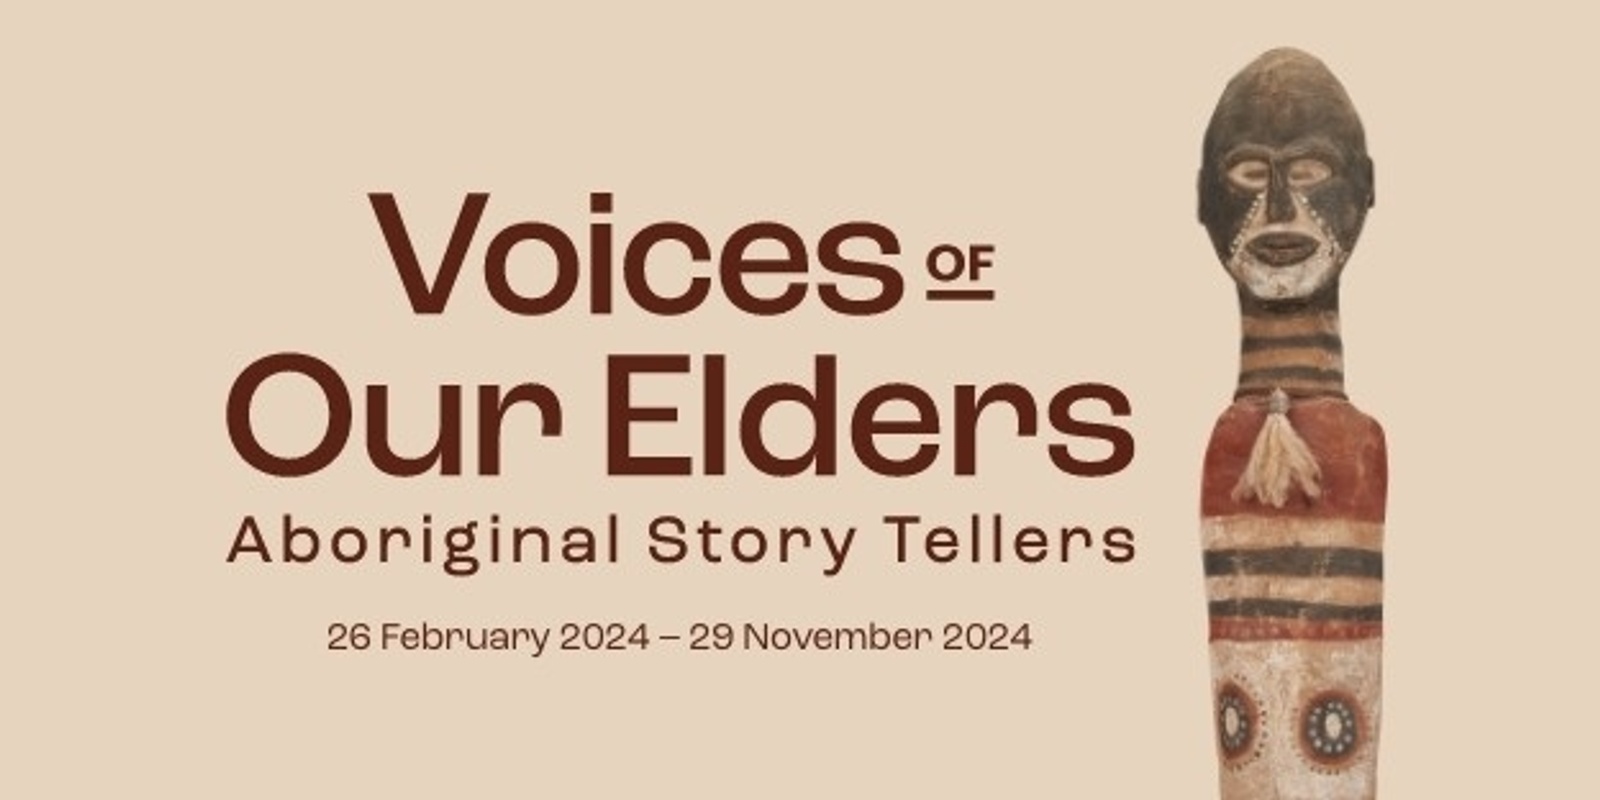 Banner image for Voices of Our Elders, Aboriginal Story Tellers Exhibition First Saturday of the month, Guided Tours at 11:30 and 1:30